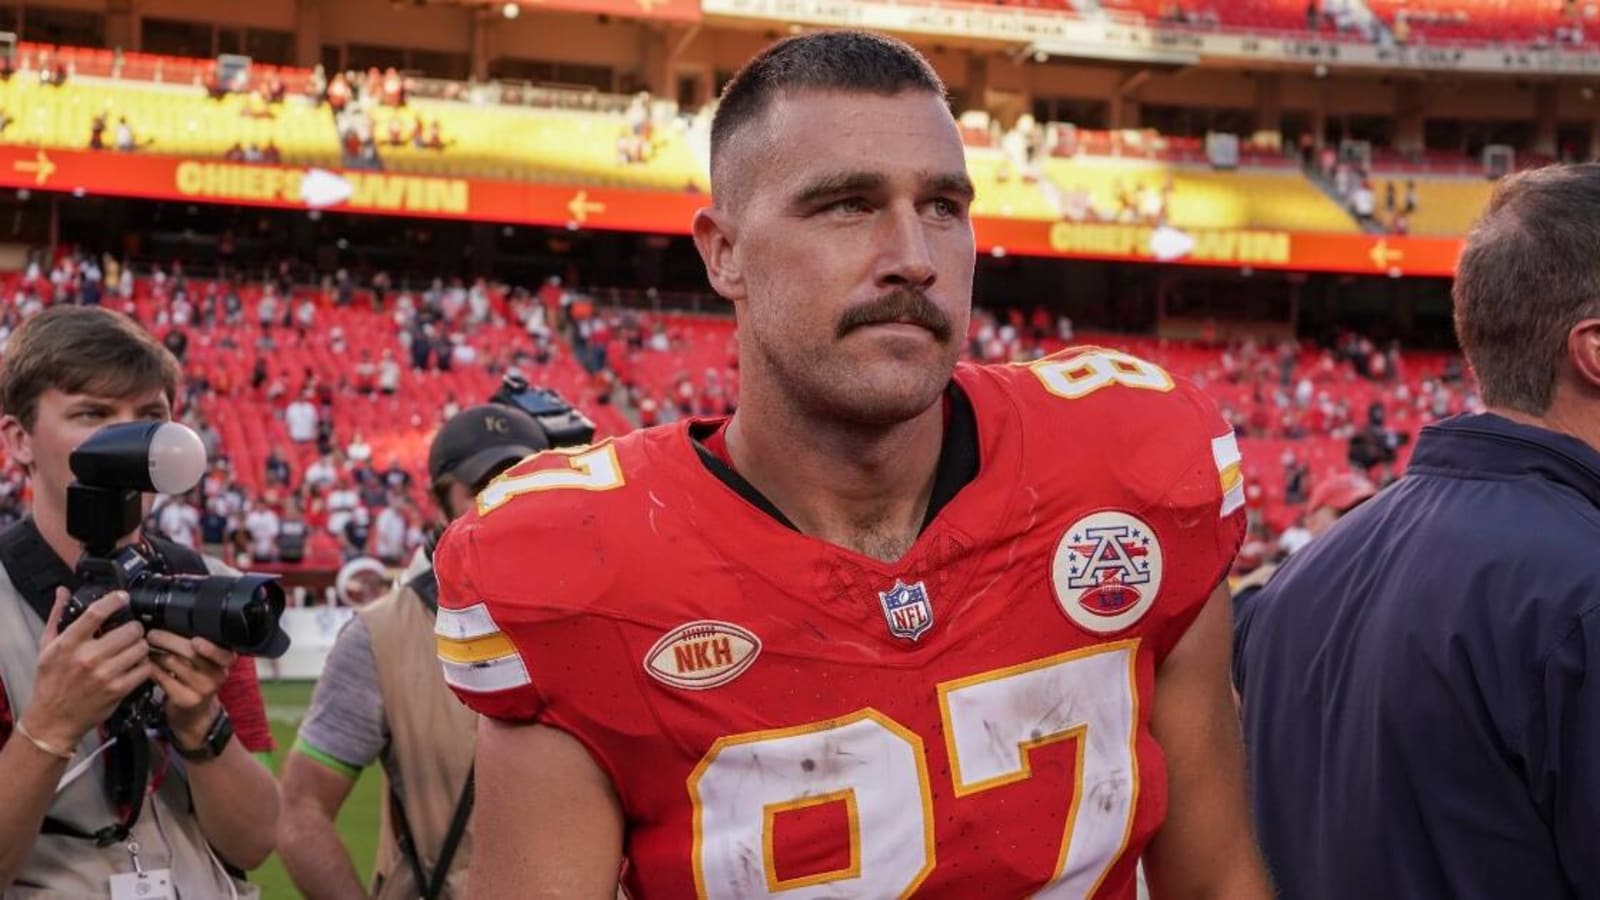 Travis Kelce jersey sales increase 400% after Taylor Swift appearance at Chiefs game